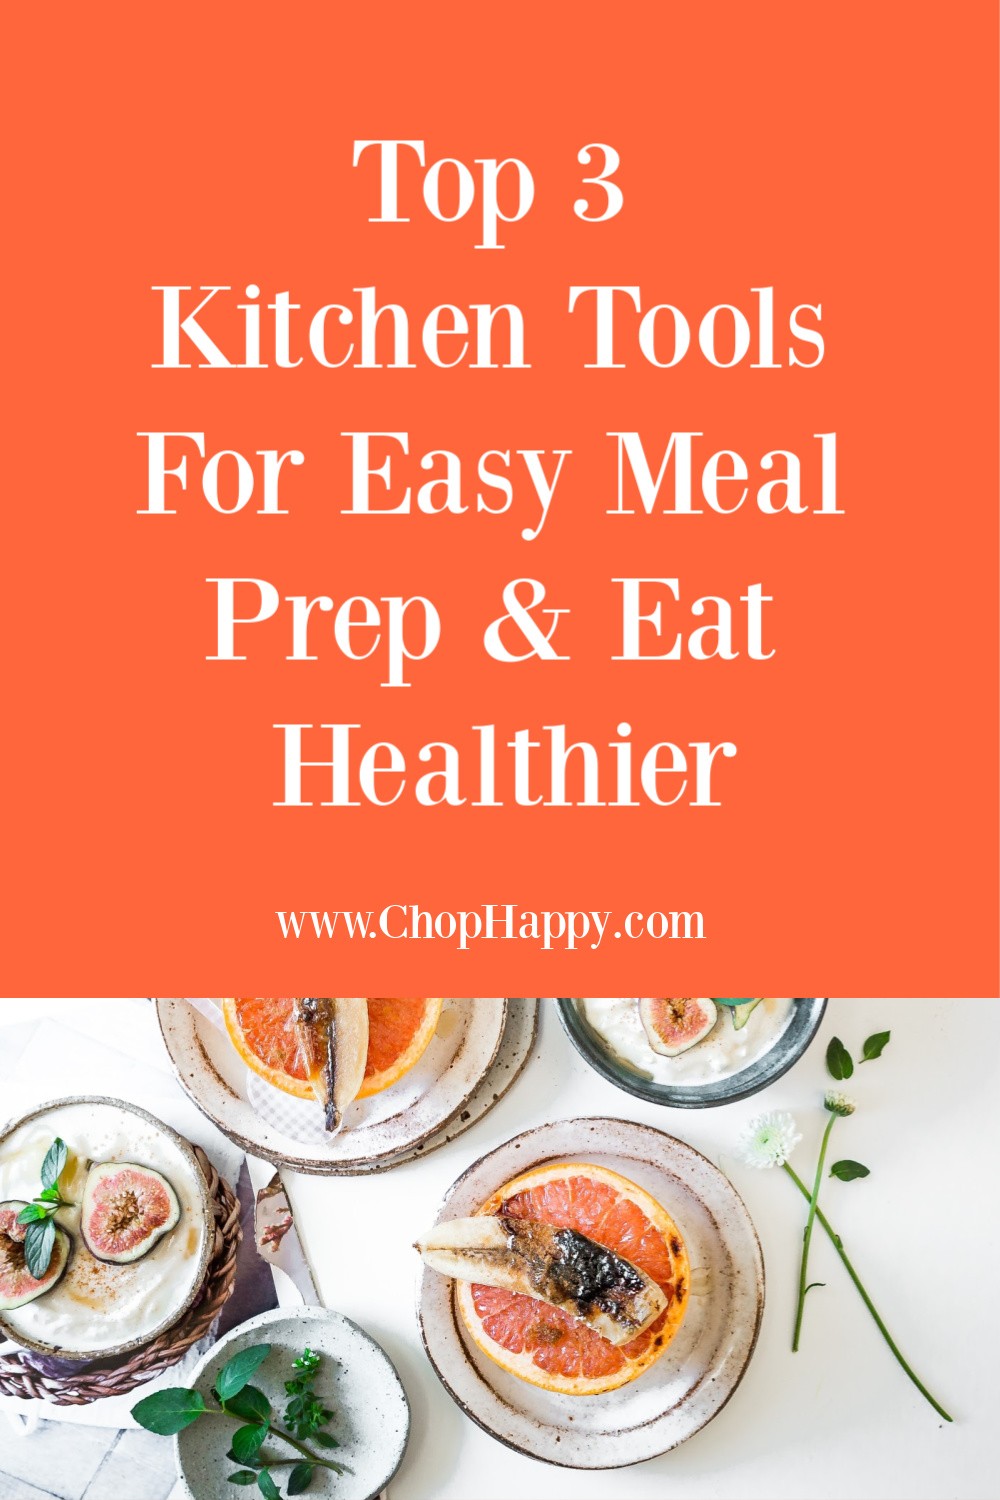 Top 3 Kitchen Tools For Easy Meal Prep & Eat Healthier - Chop Happy